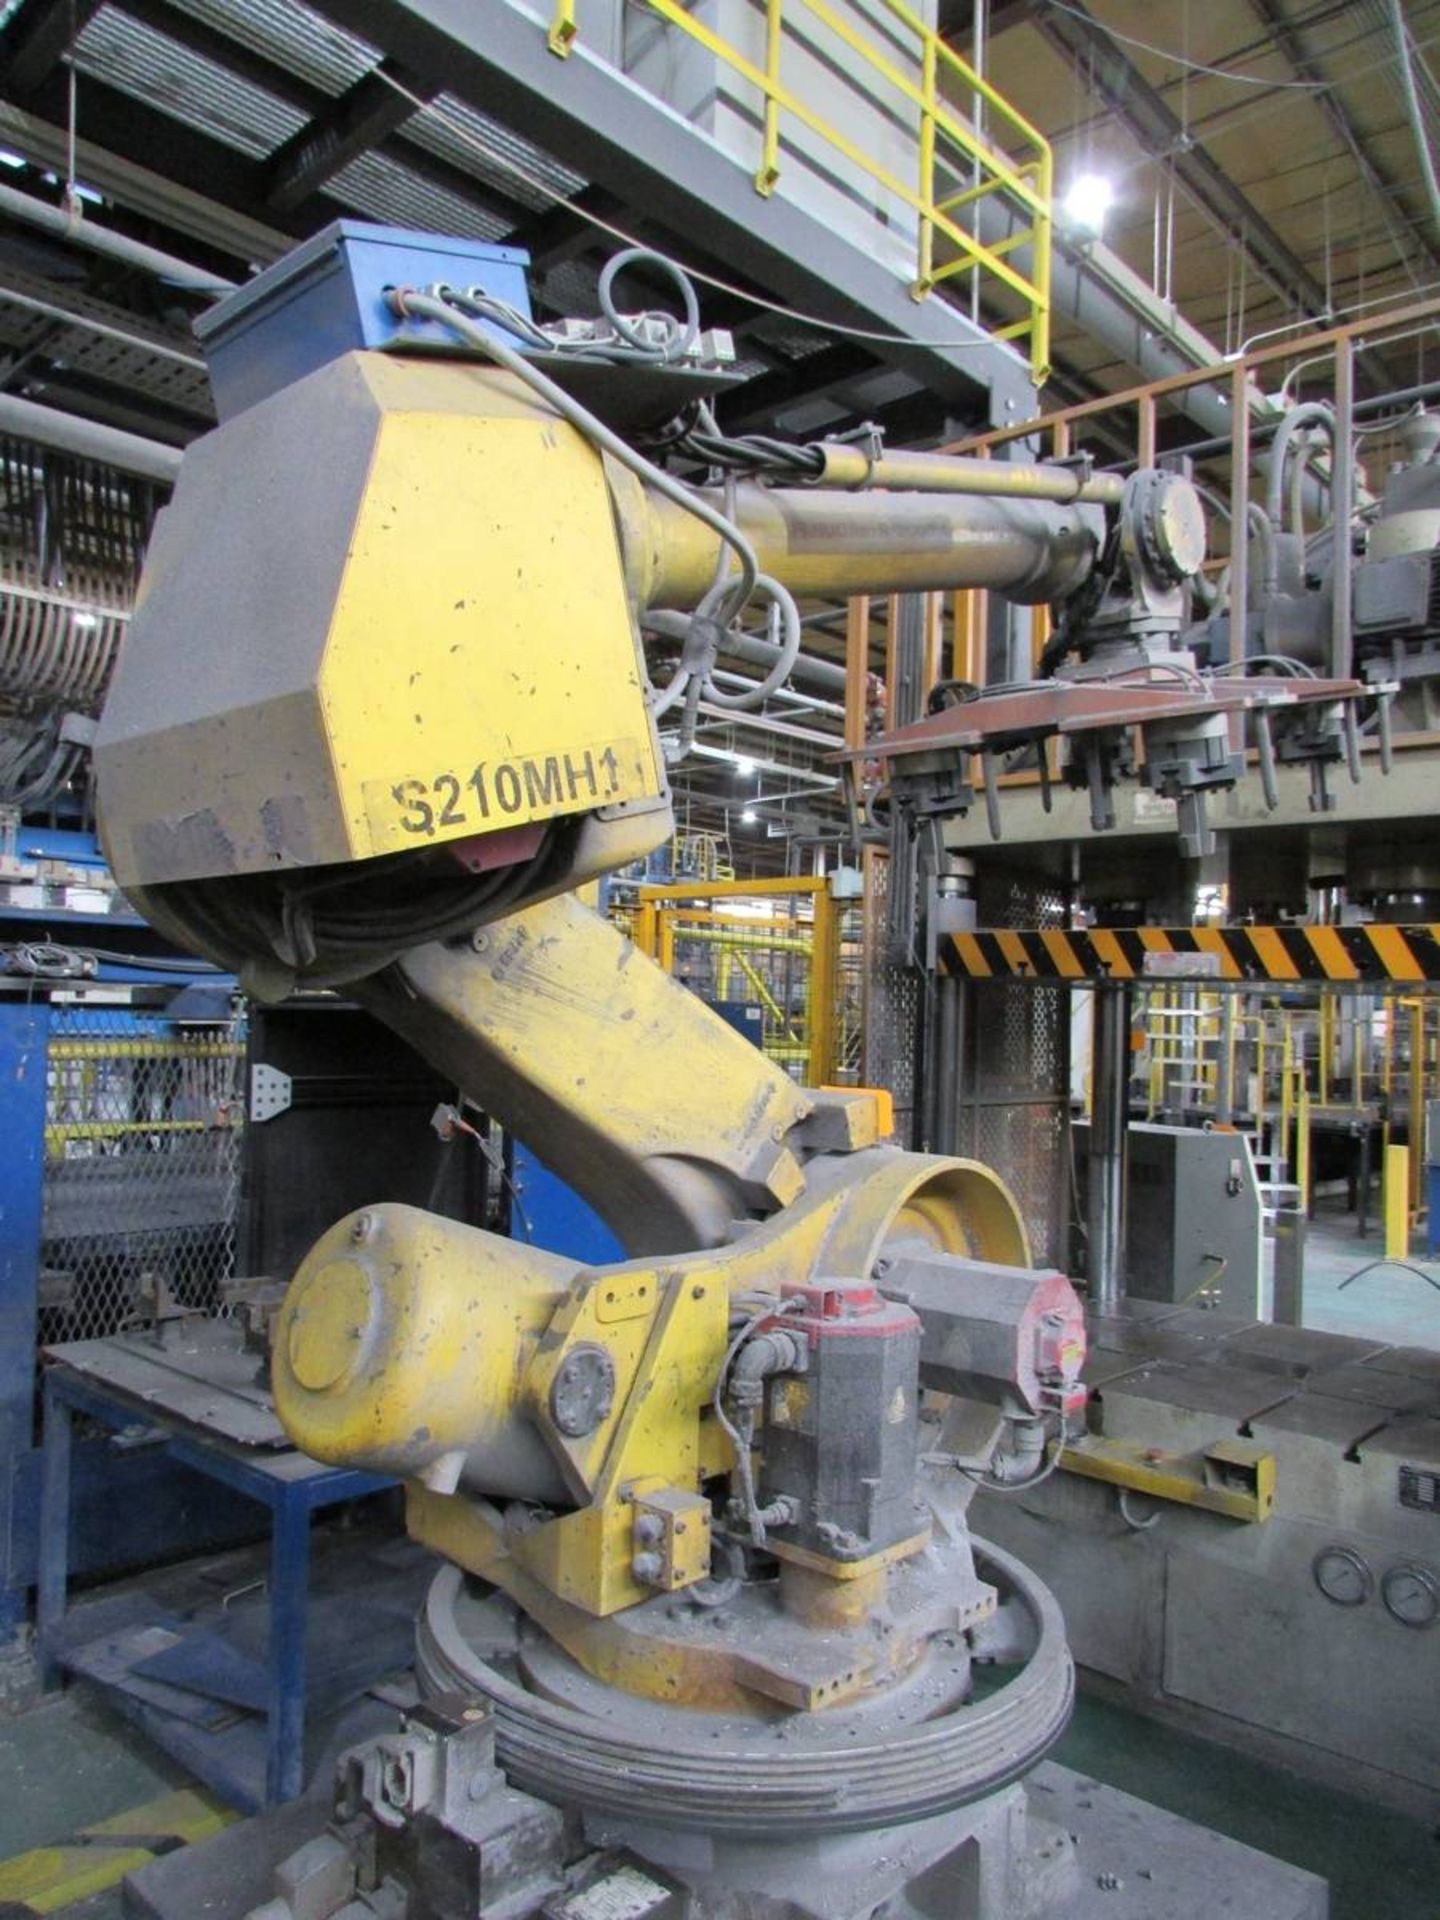 2004 FANUC R-2000 iC 125L 6 Axis Material Handling Robot - Image 6 of 10